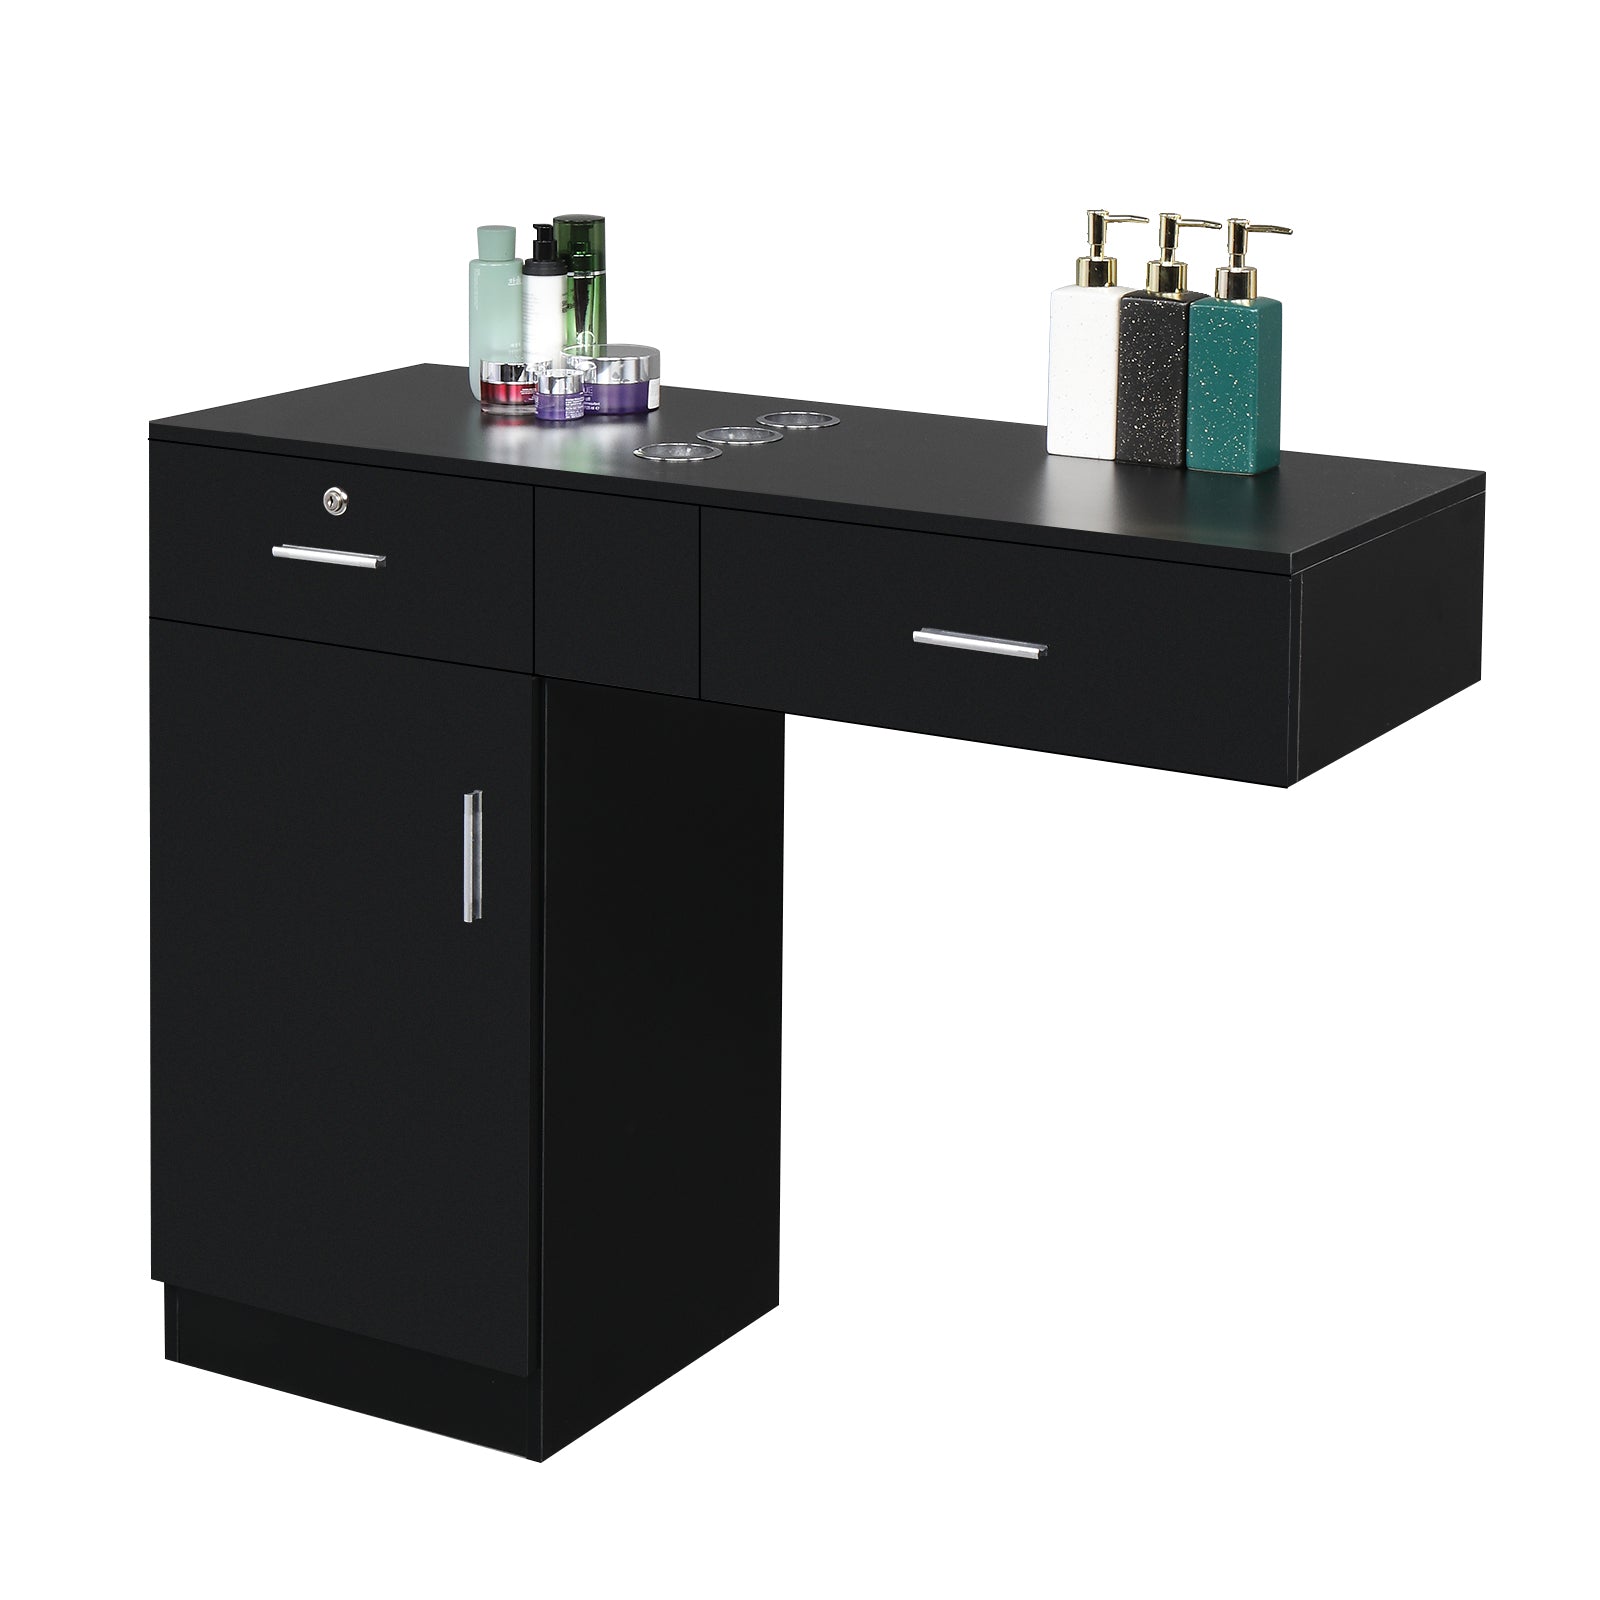 ZNTS Wall-Mounted Hairdressing Cabinet 2 Drawers 2 Locks 1 Door 3 Hair Dryer Black 86347759